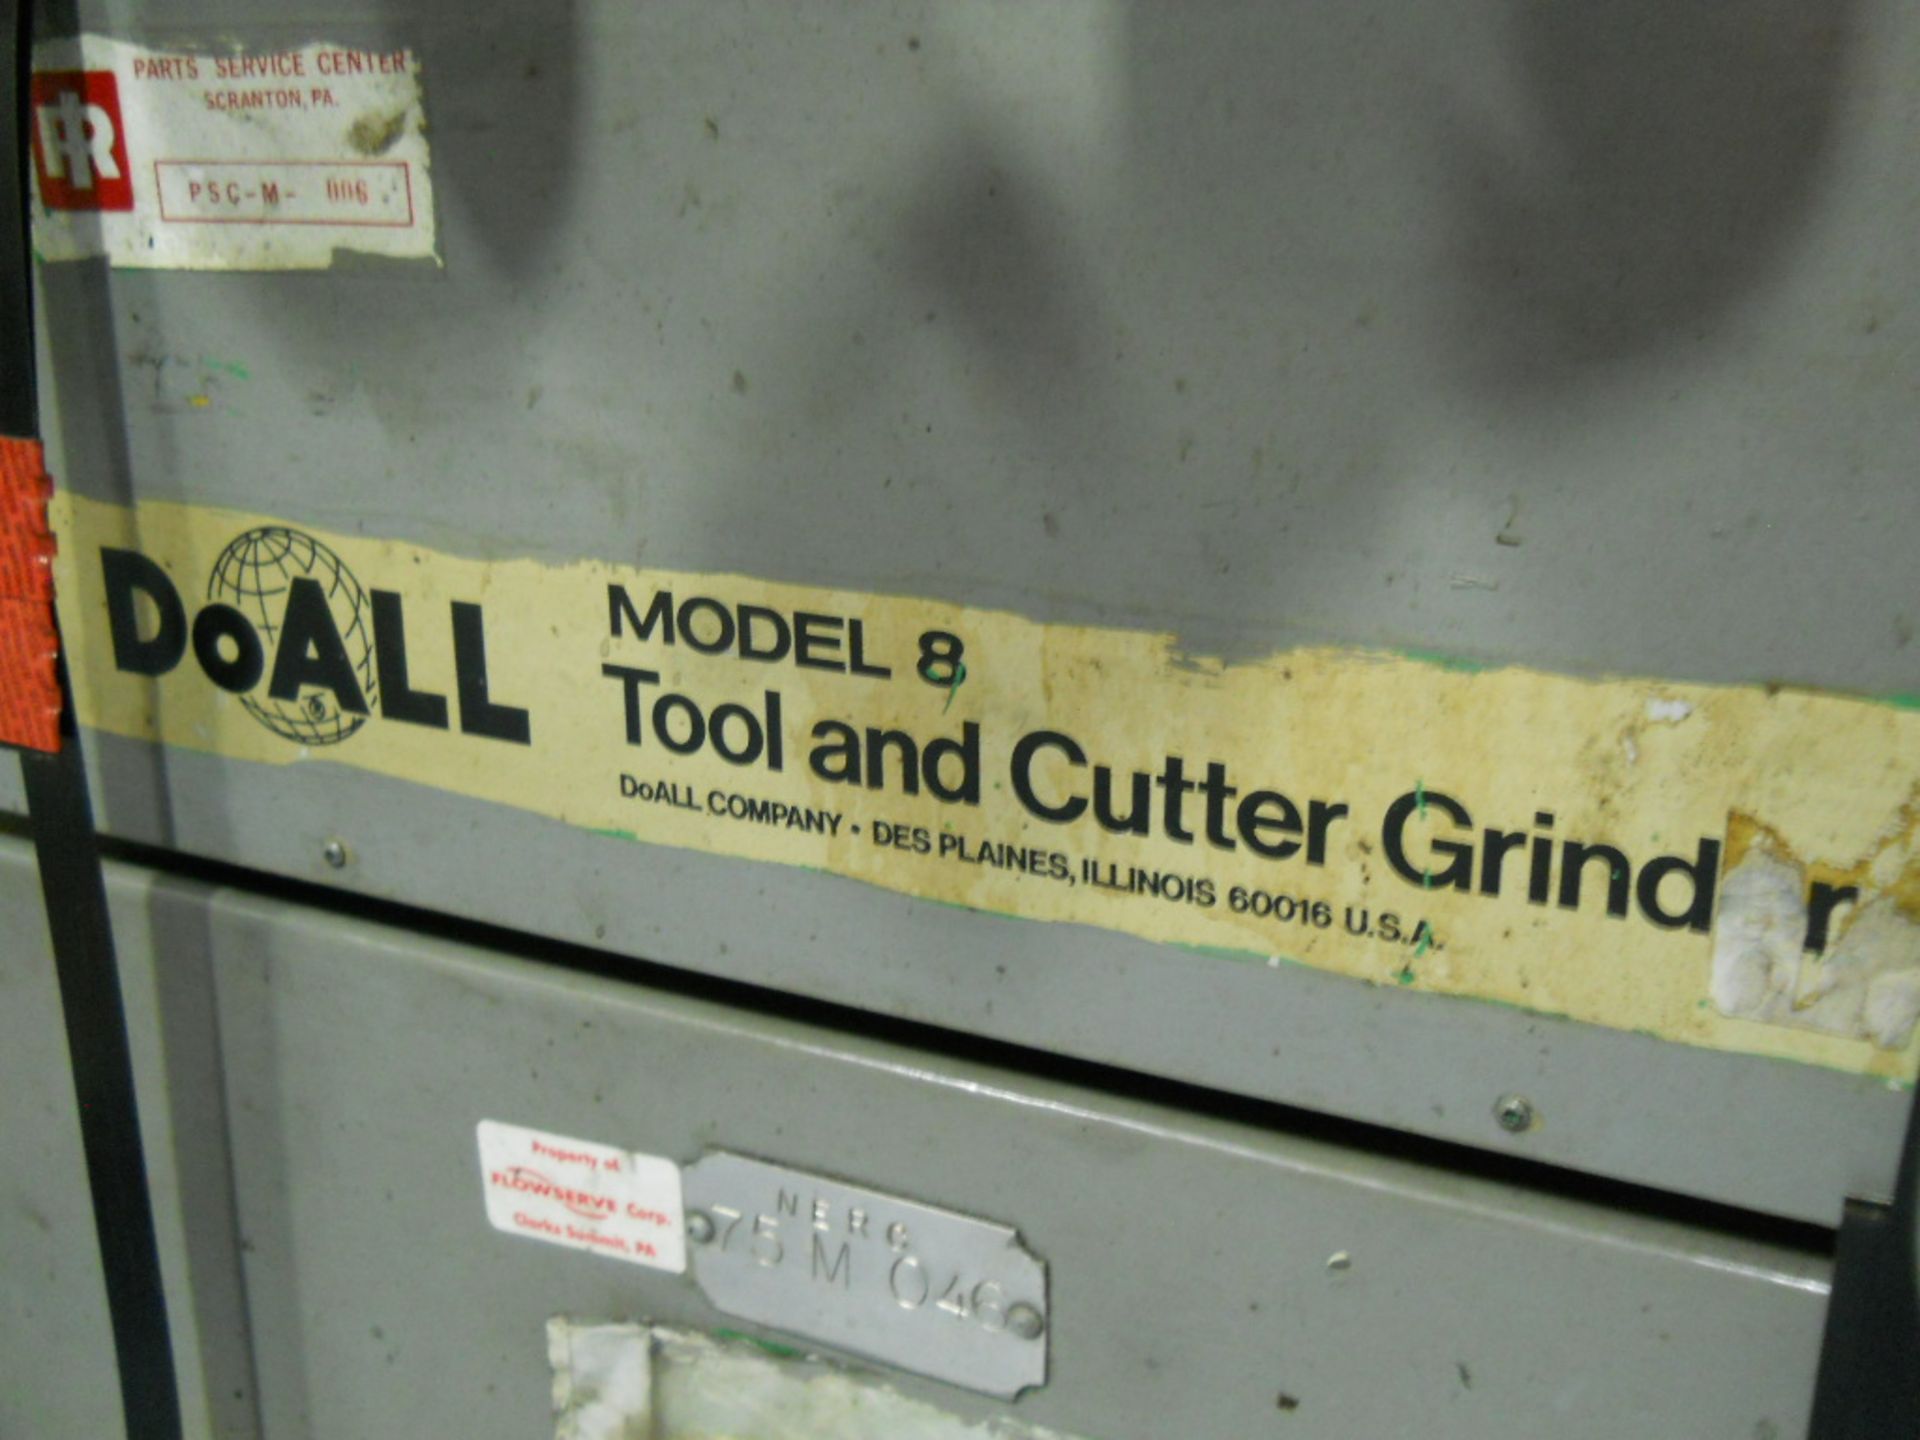 DOALL TOOL AND CUTTER/GRINDER, MODEL #8, S/N 32976/G200, 240 V - Image 3 of 4